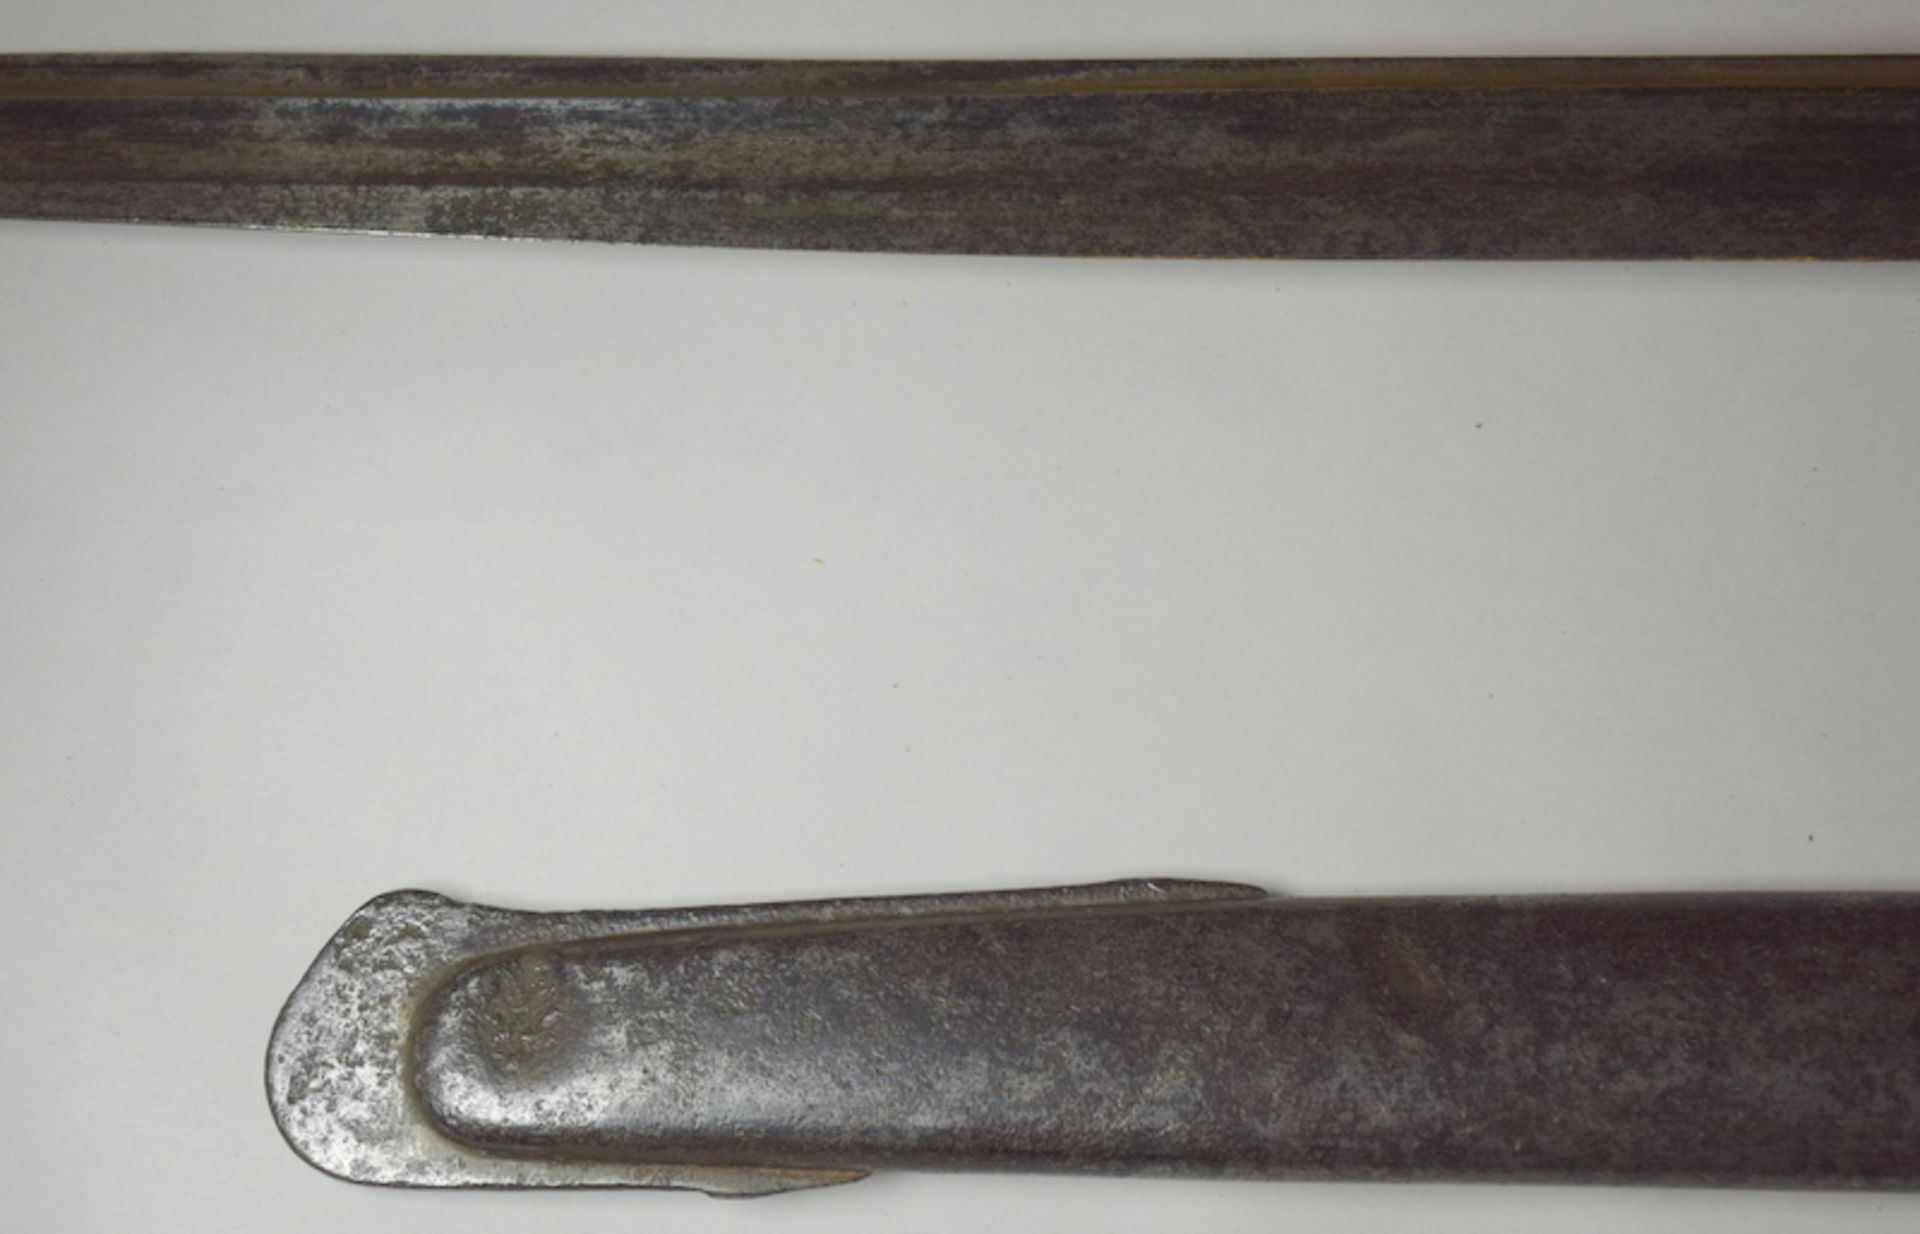 French Napoleonic Era Sword Complete With Scabbard - Image 6 of 6